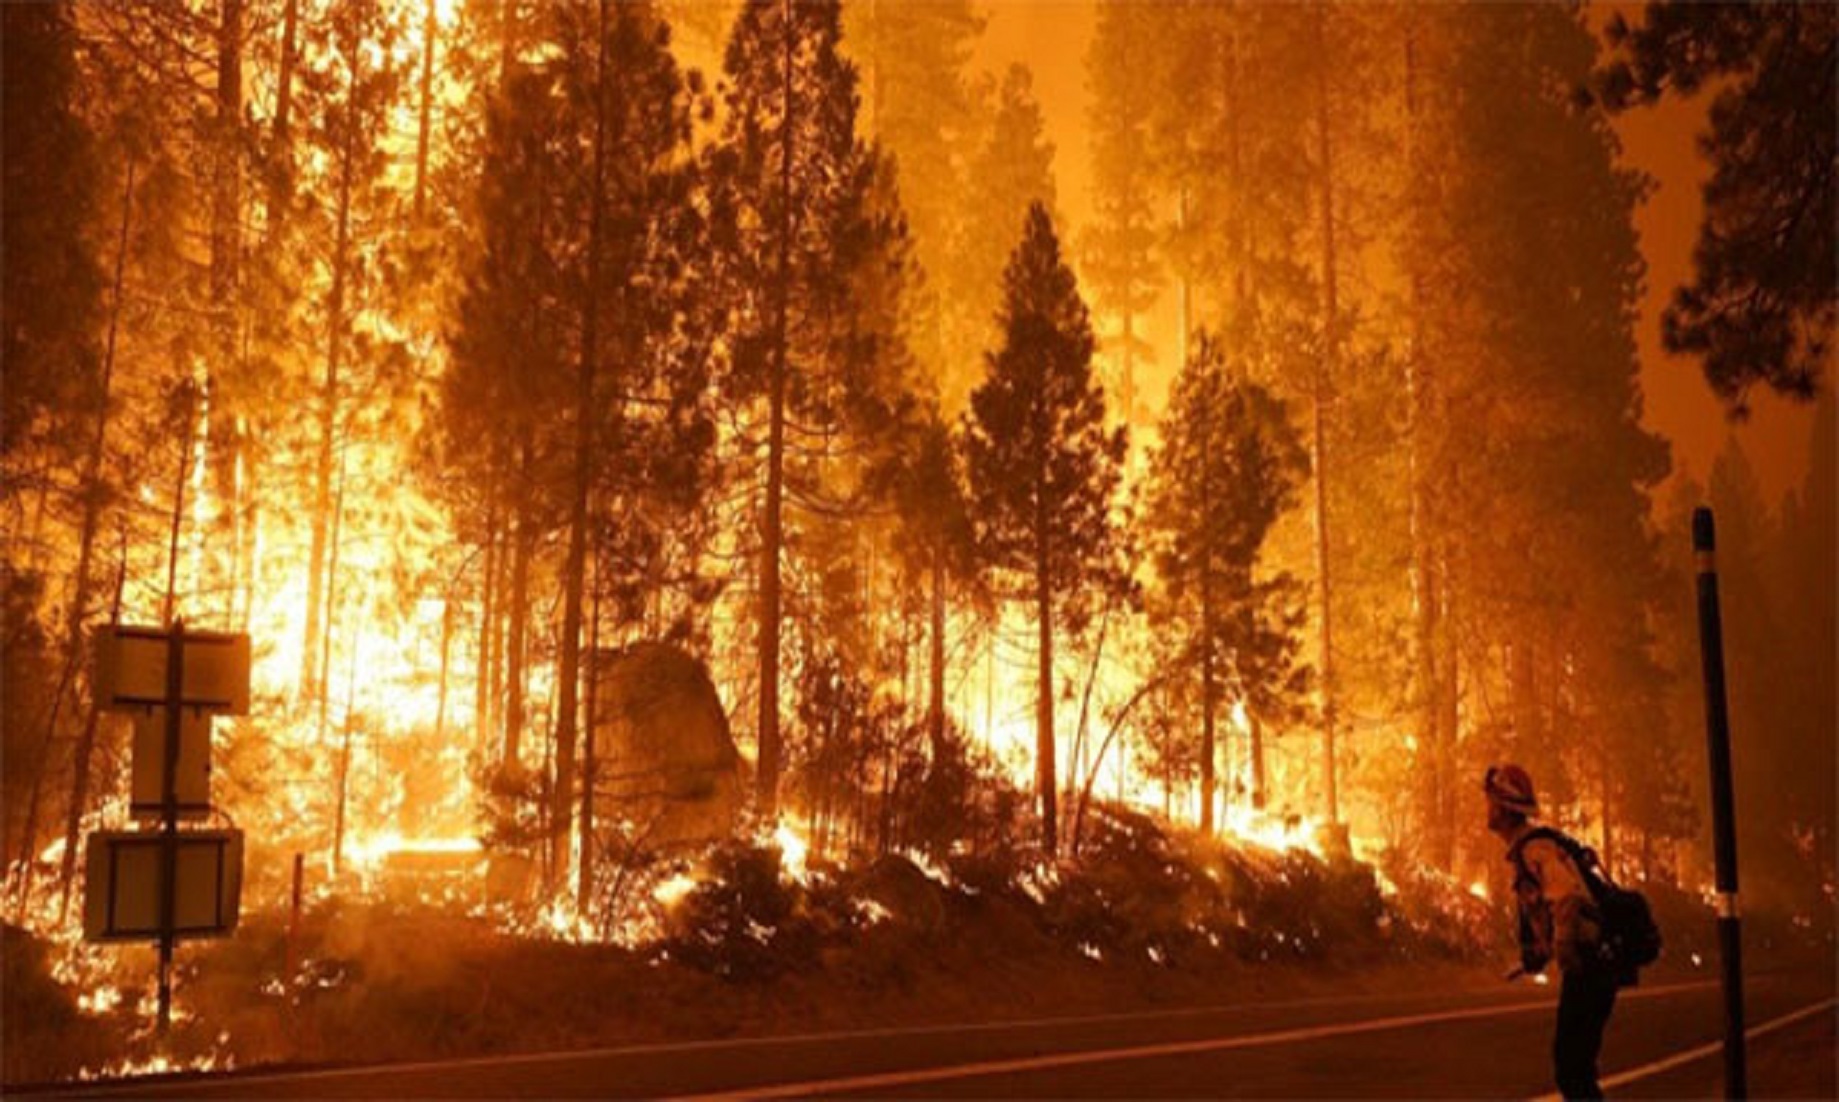 US: Wildfires burn over 4.1 mln acres in California – Cal Fire summary